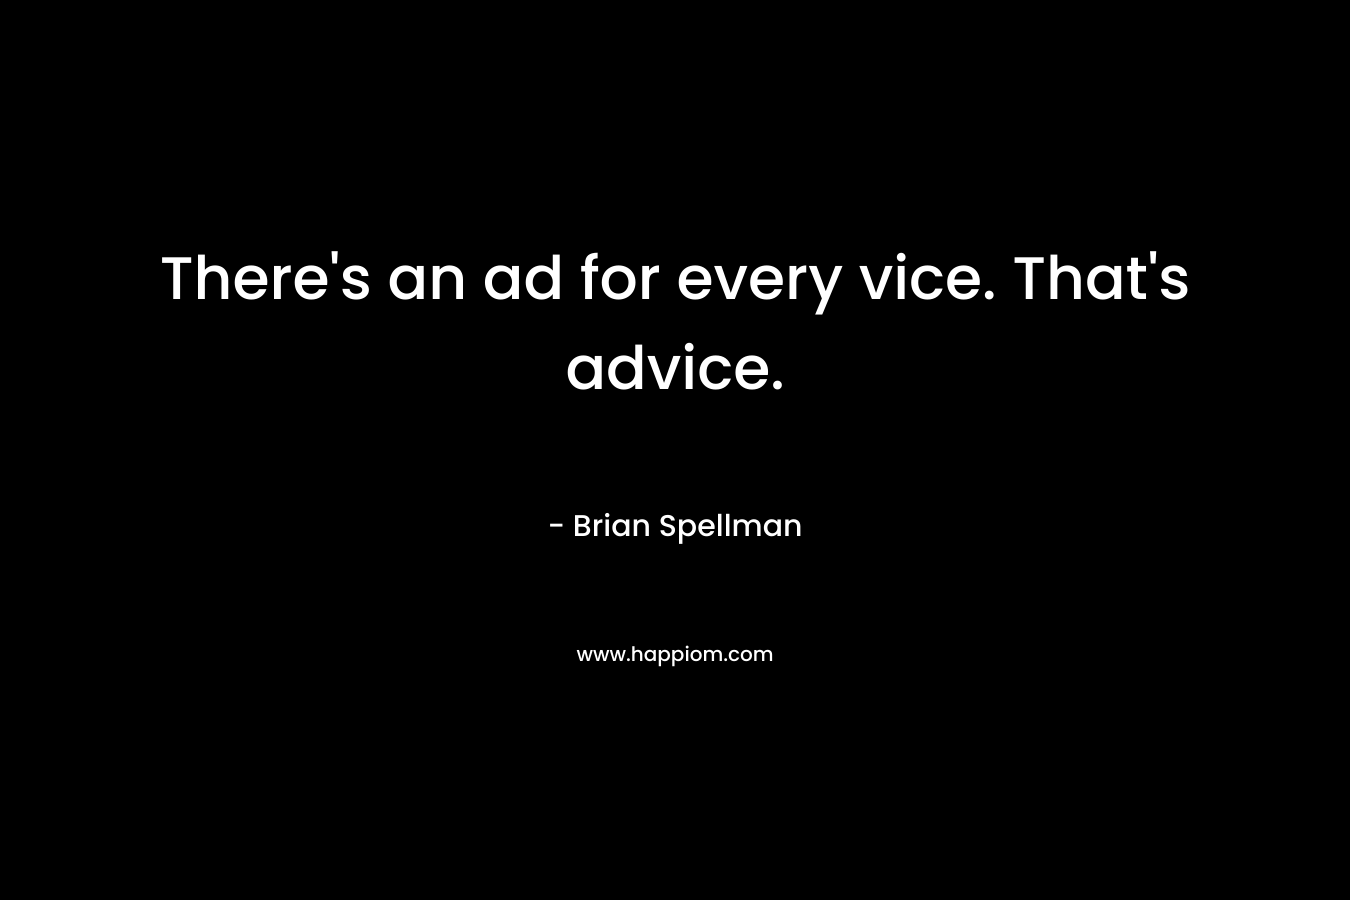 There’s an ad for every vice. That’s advice. – Brian Spellman